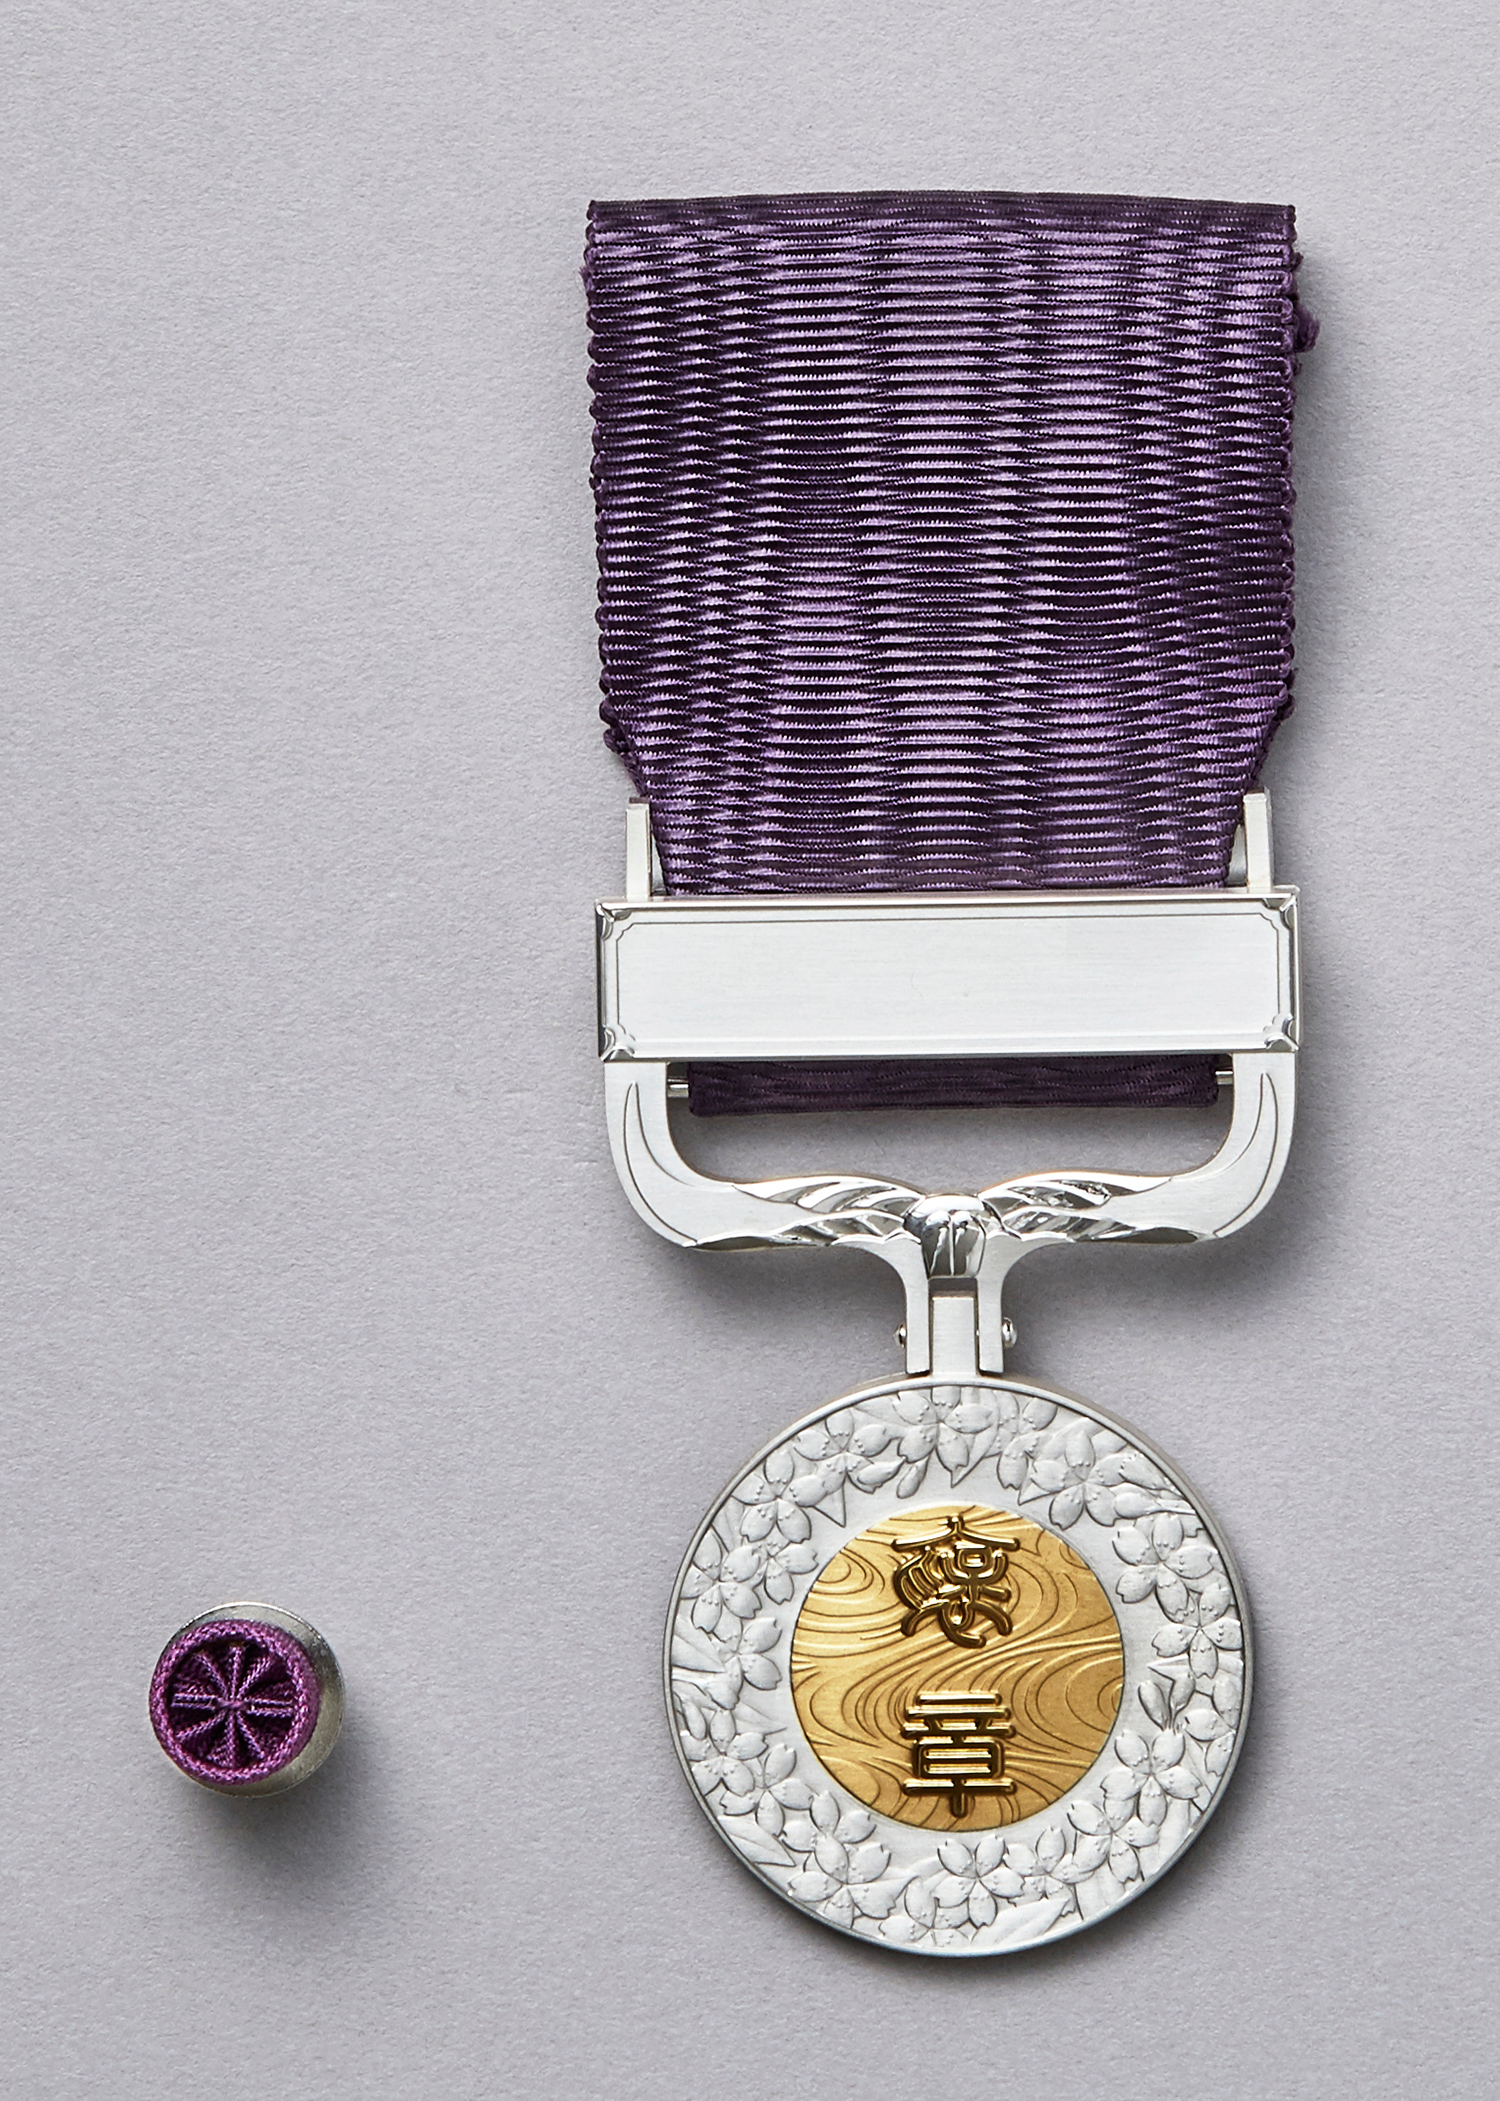 File Medal With Purple Ribbon Png Wikimedia Commons